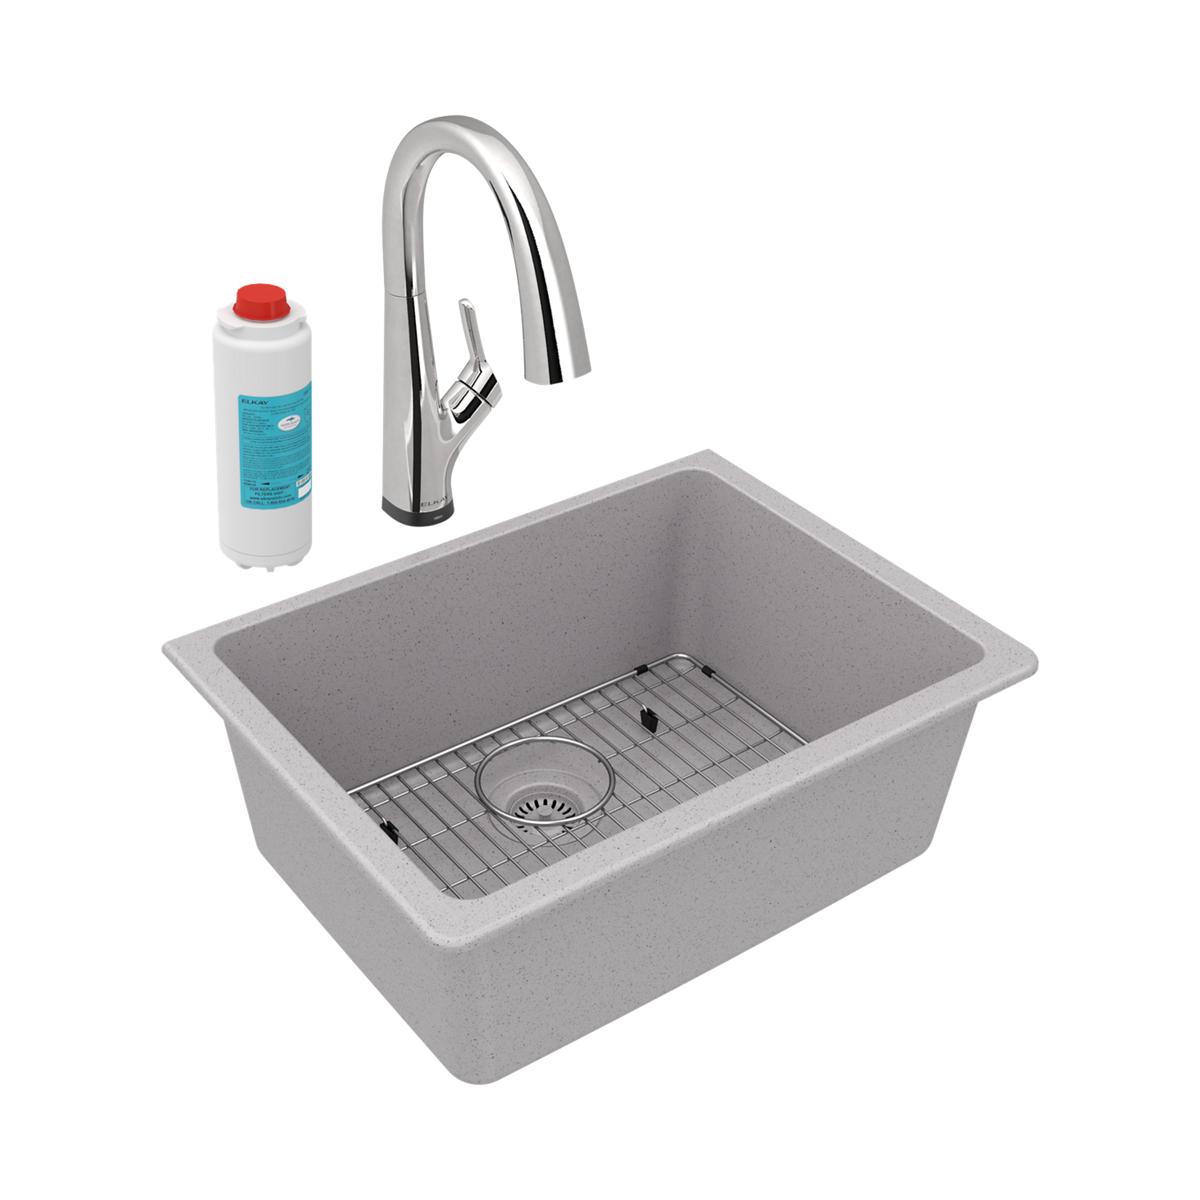 Elkay Quartz Classic 24-5/8" x 18-1/2" x 9-1/2" Single Bowl Undermount Sink Kit with Filtered Faucet